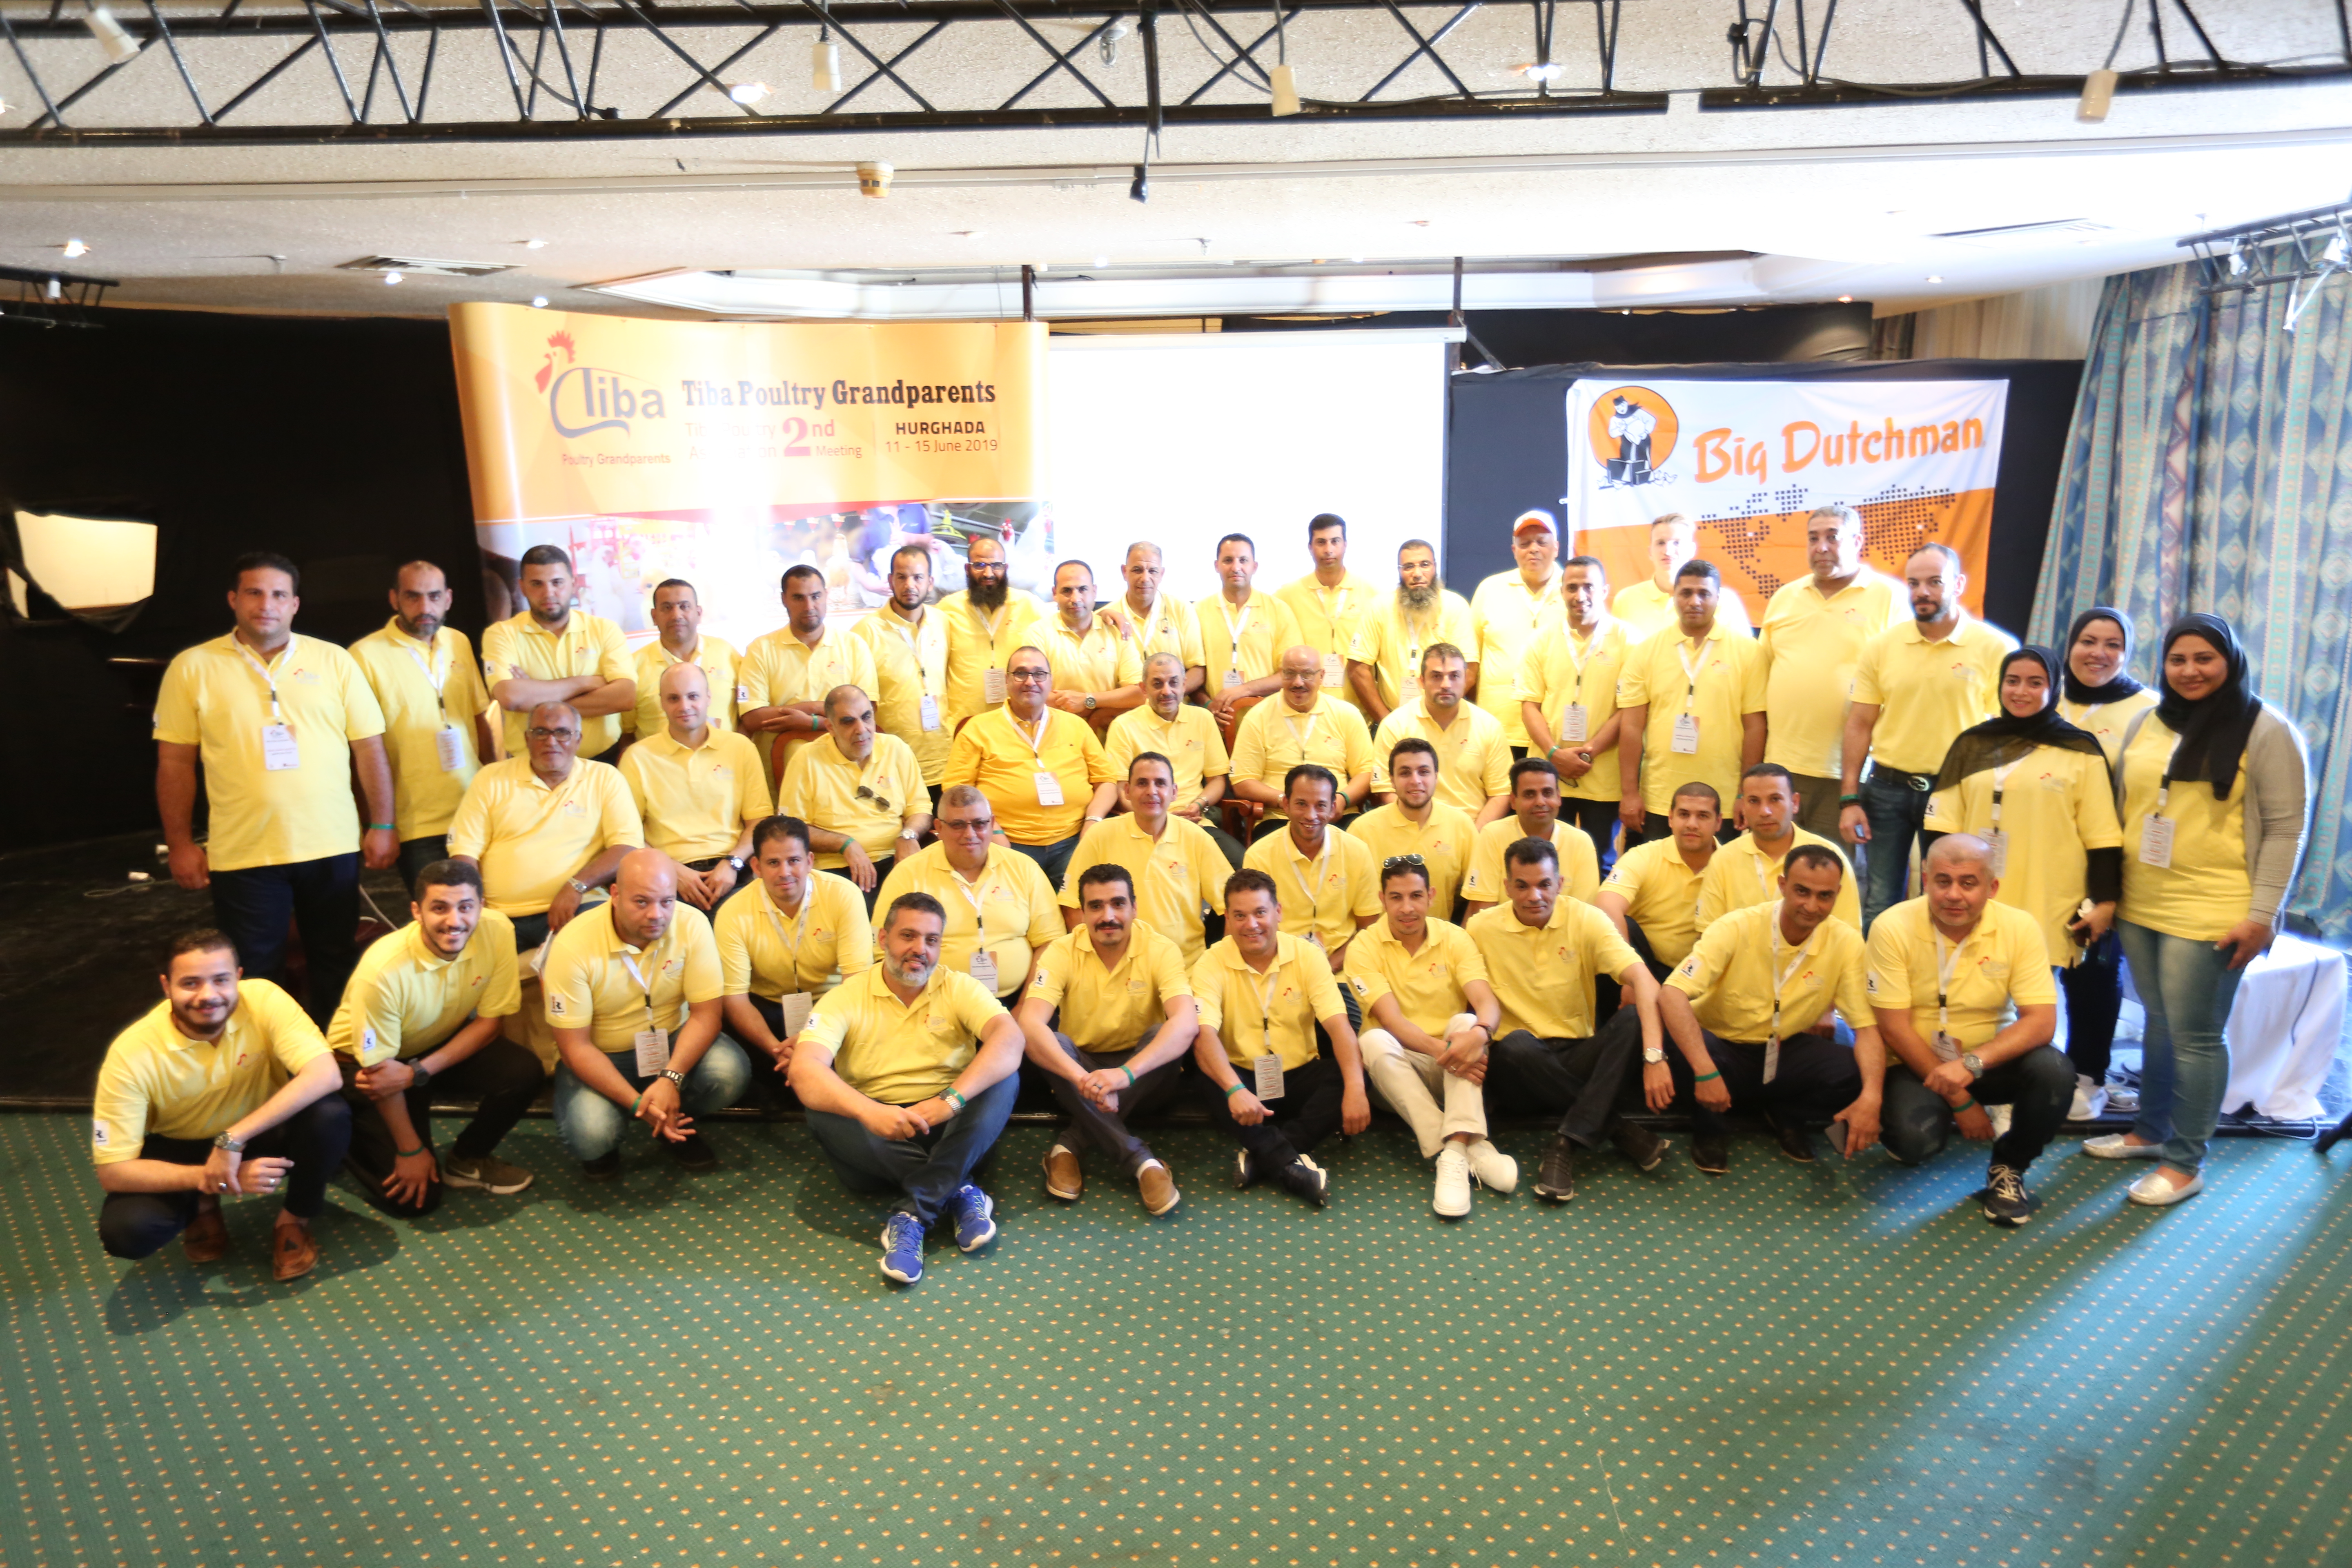 a group of people wearing yellow t-shirts line up for a photo